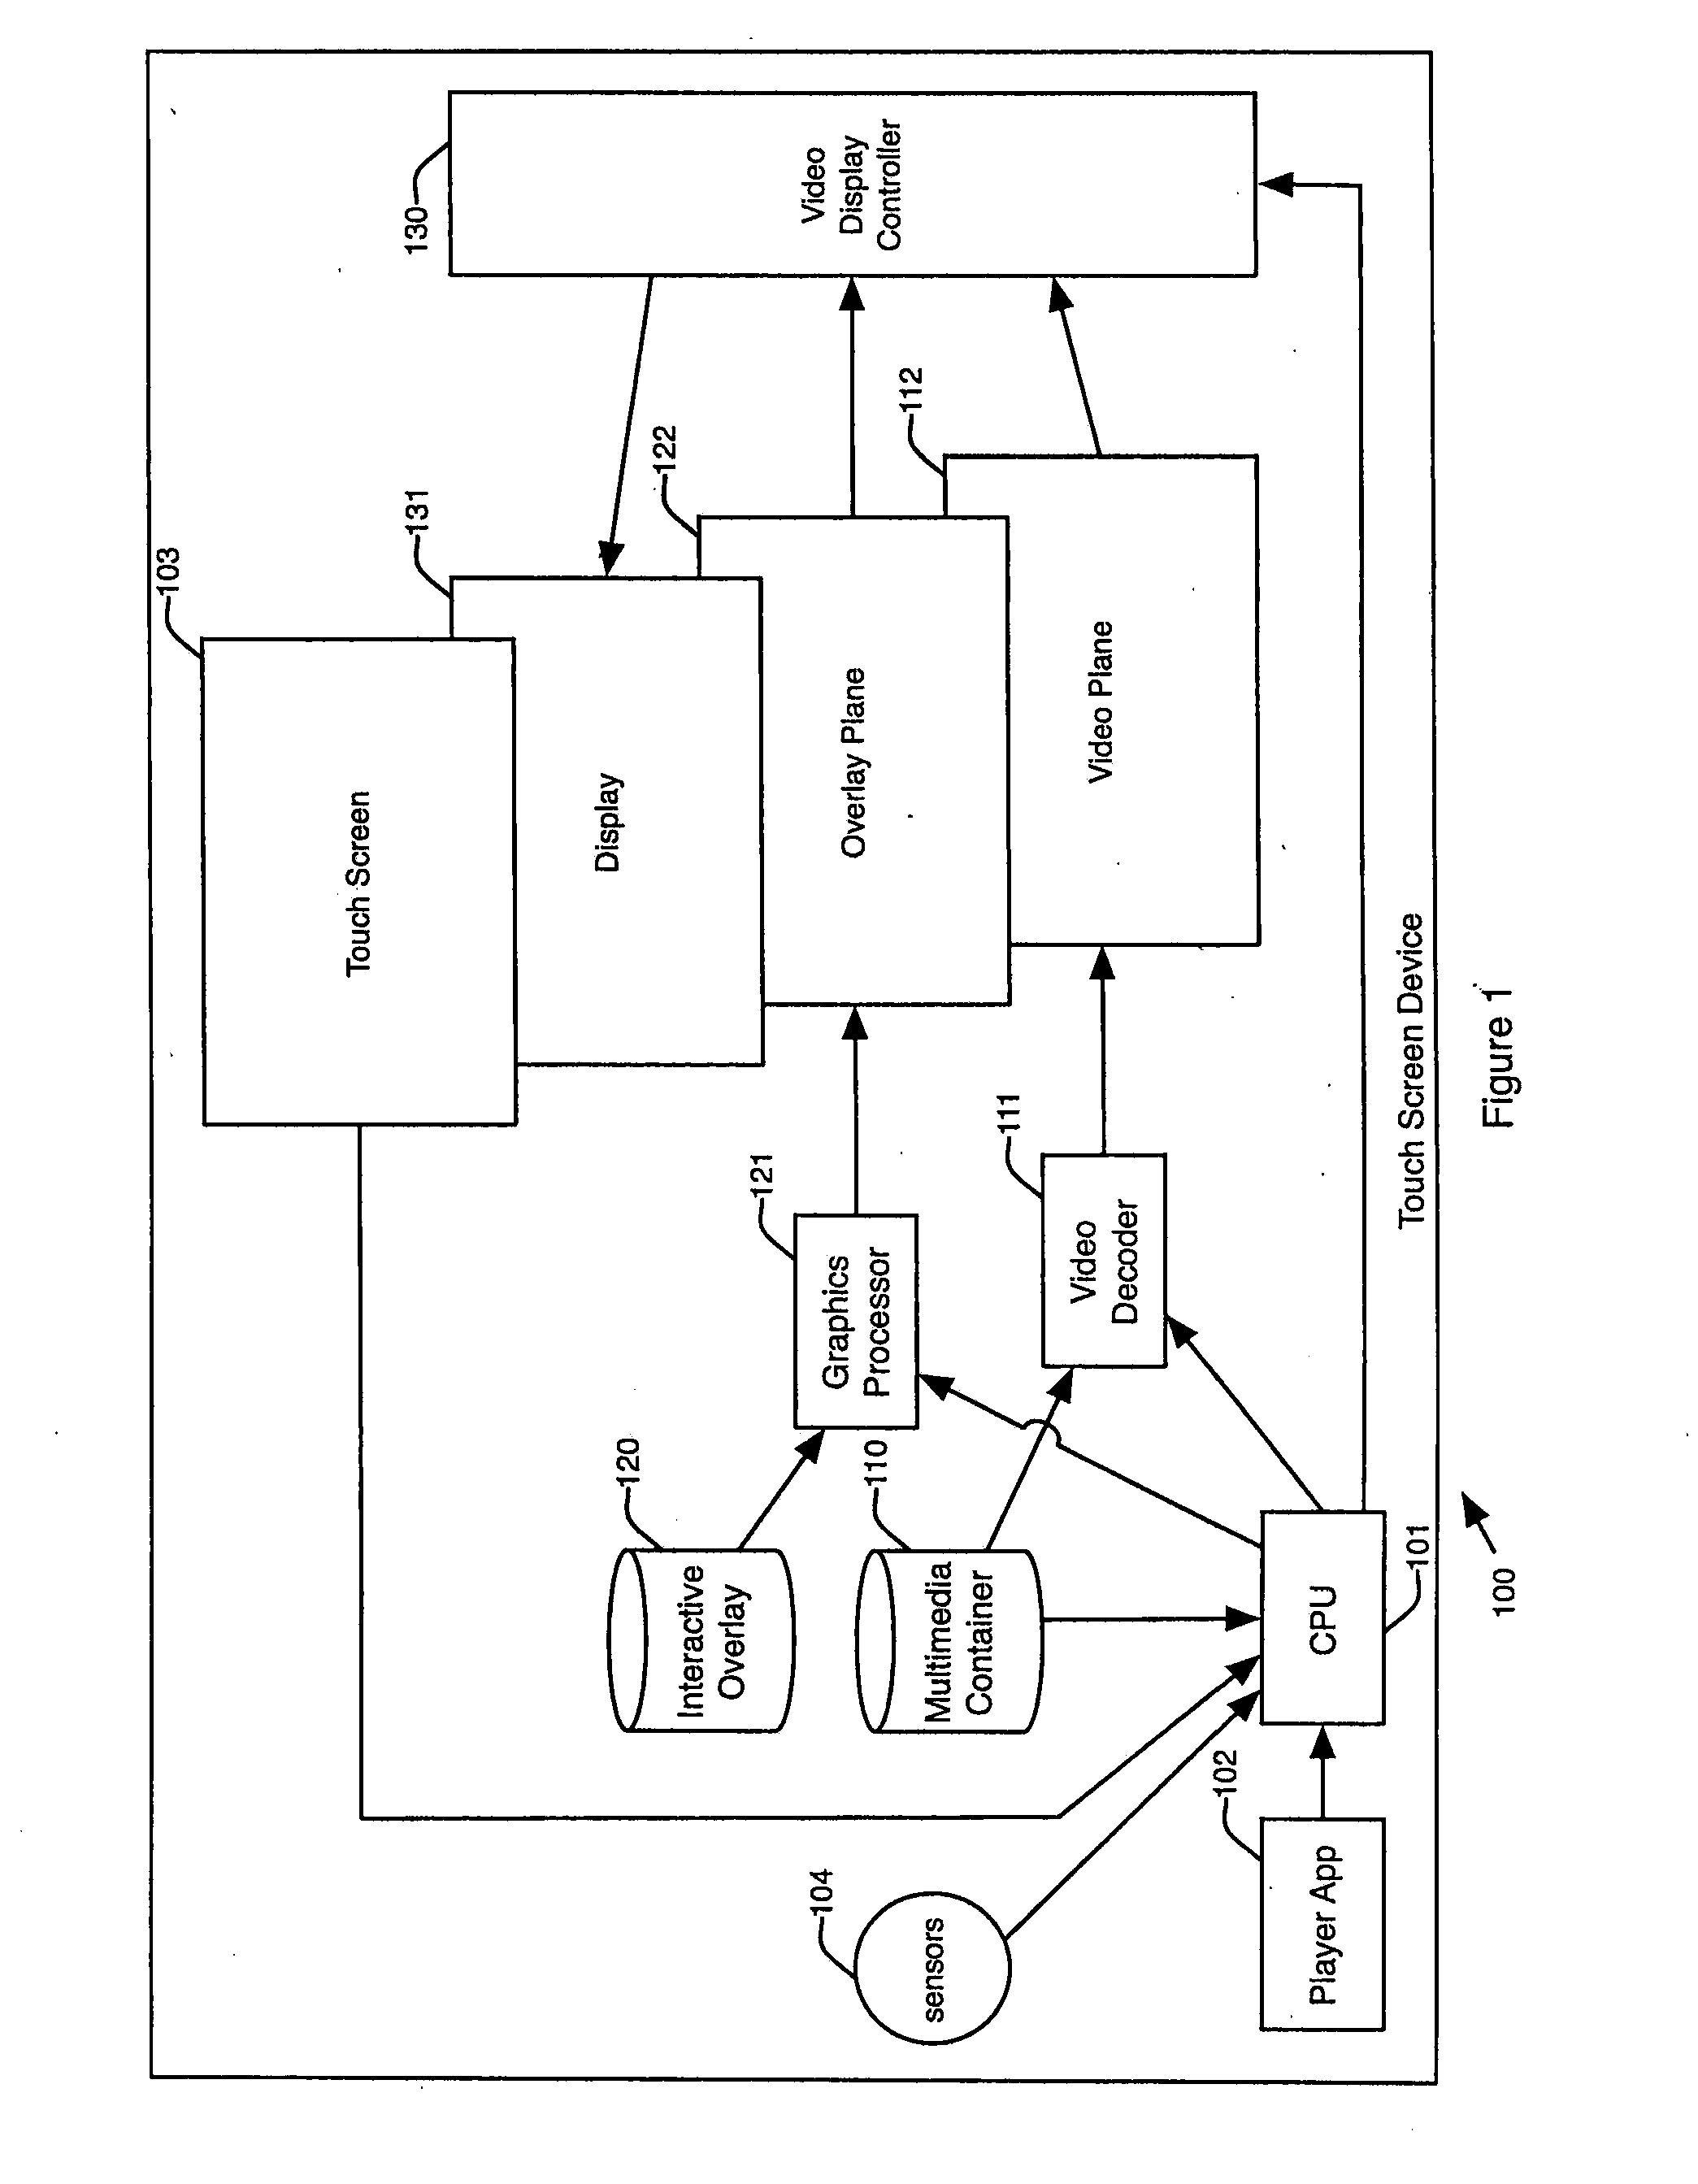 Method and apparatus for providing context sensitive interactive overlays for video